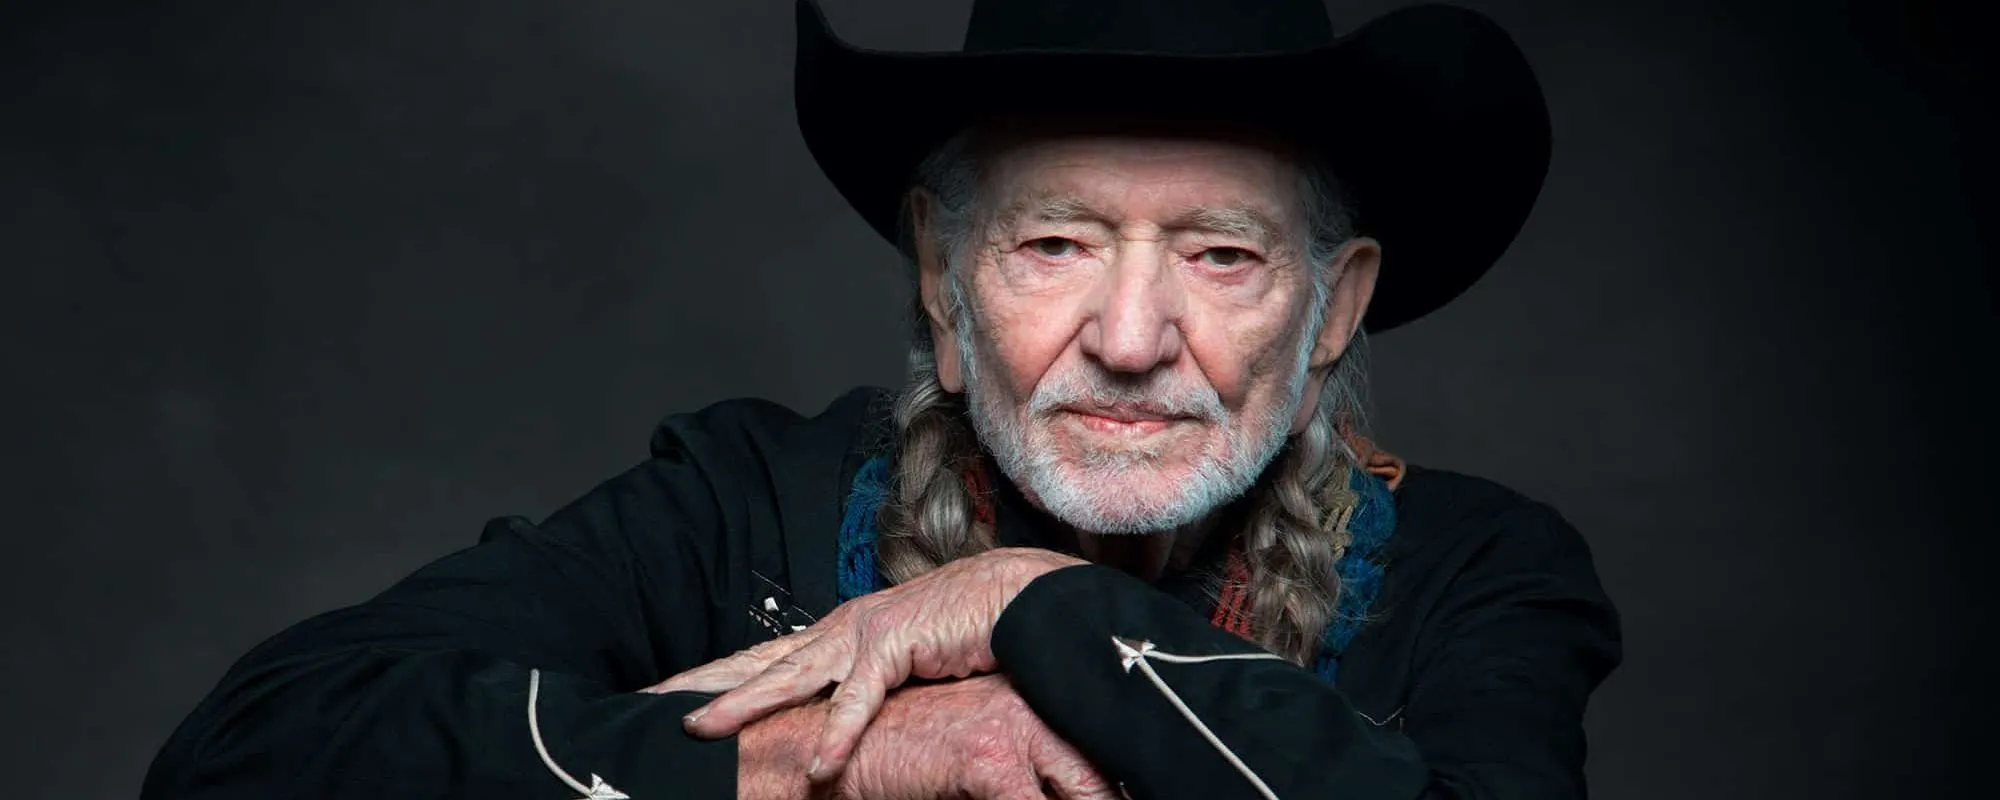 Behind The Song: “Crazy” by Willie Nelson